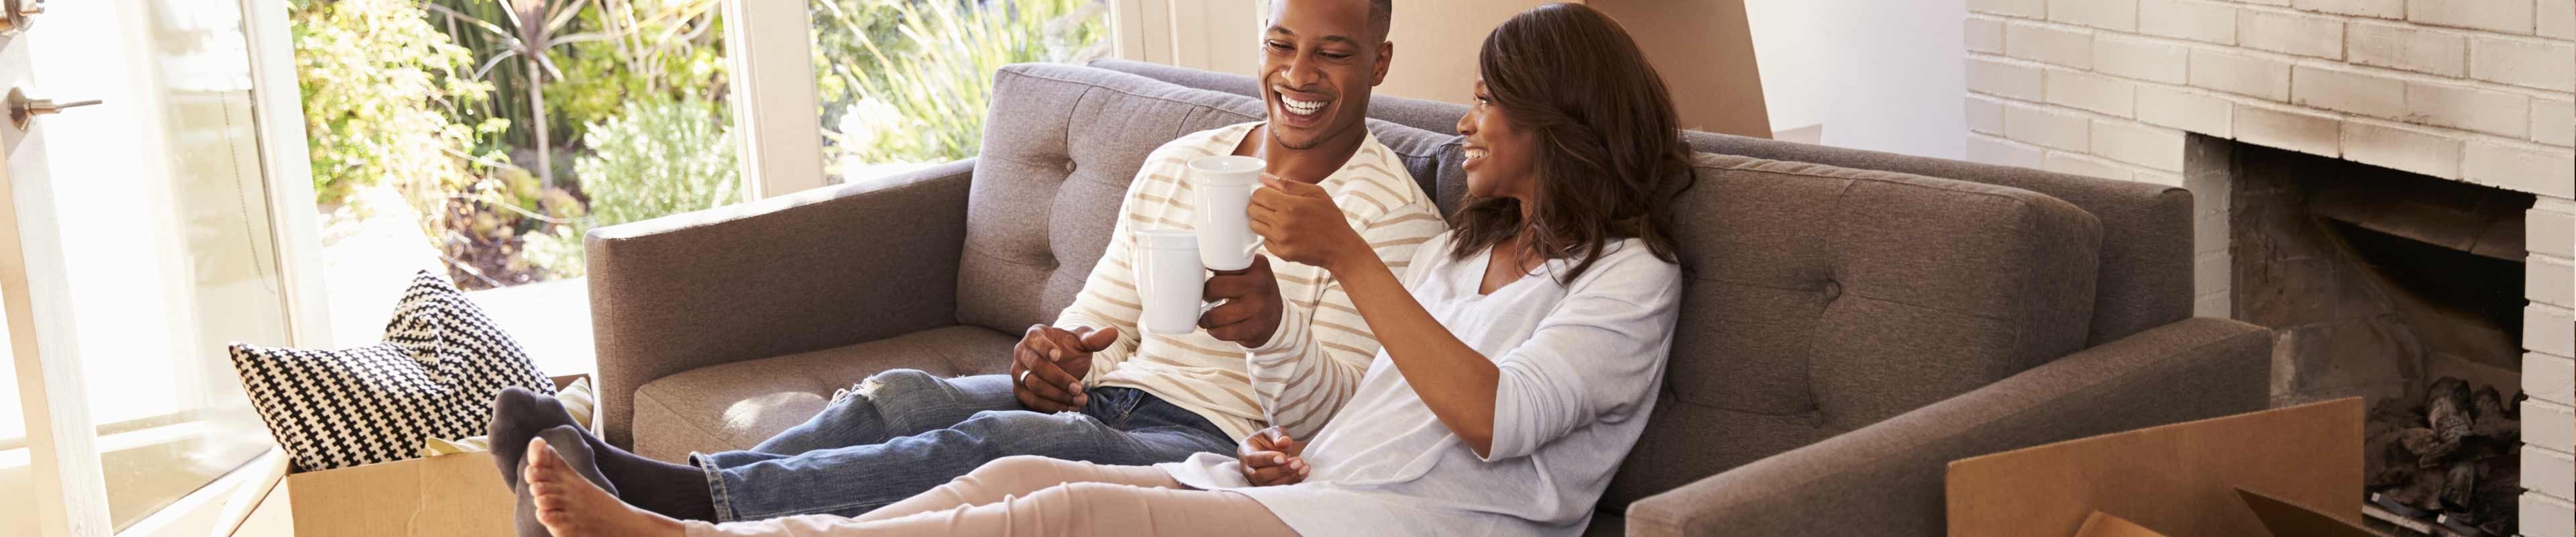 Young couple sitting on couch drinking coffee celebrating becoming home owners.